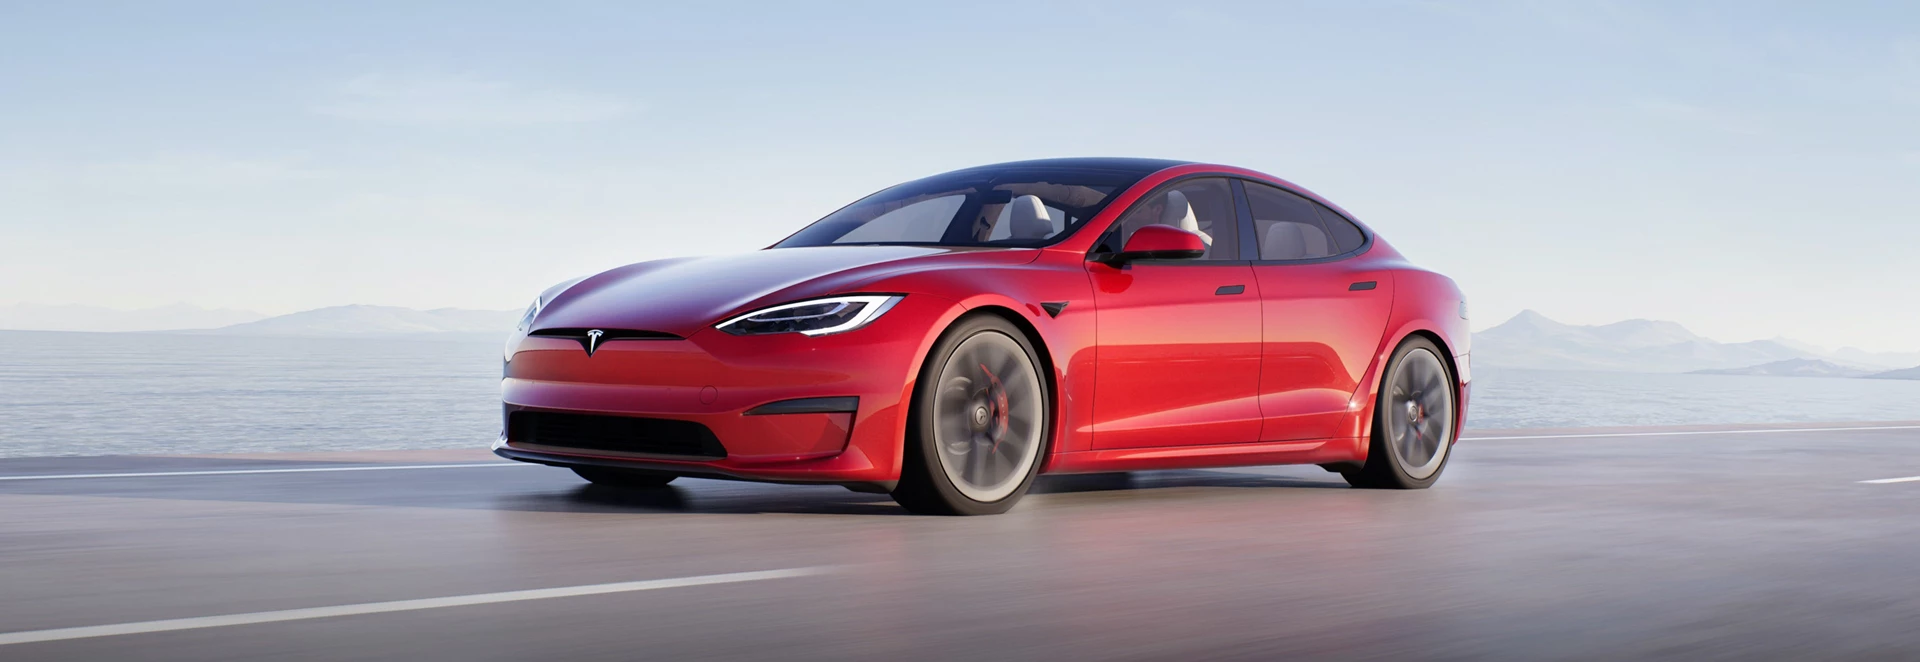 Heavily updated Tesla Model S and Model X revealed 